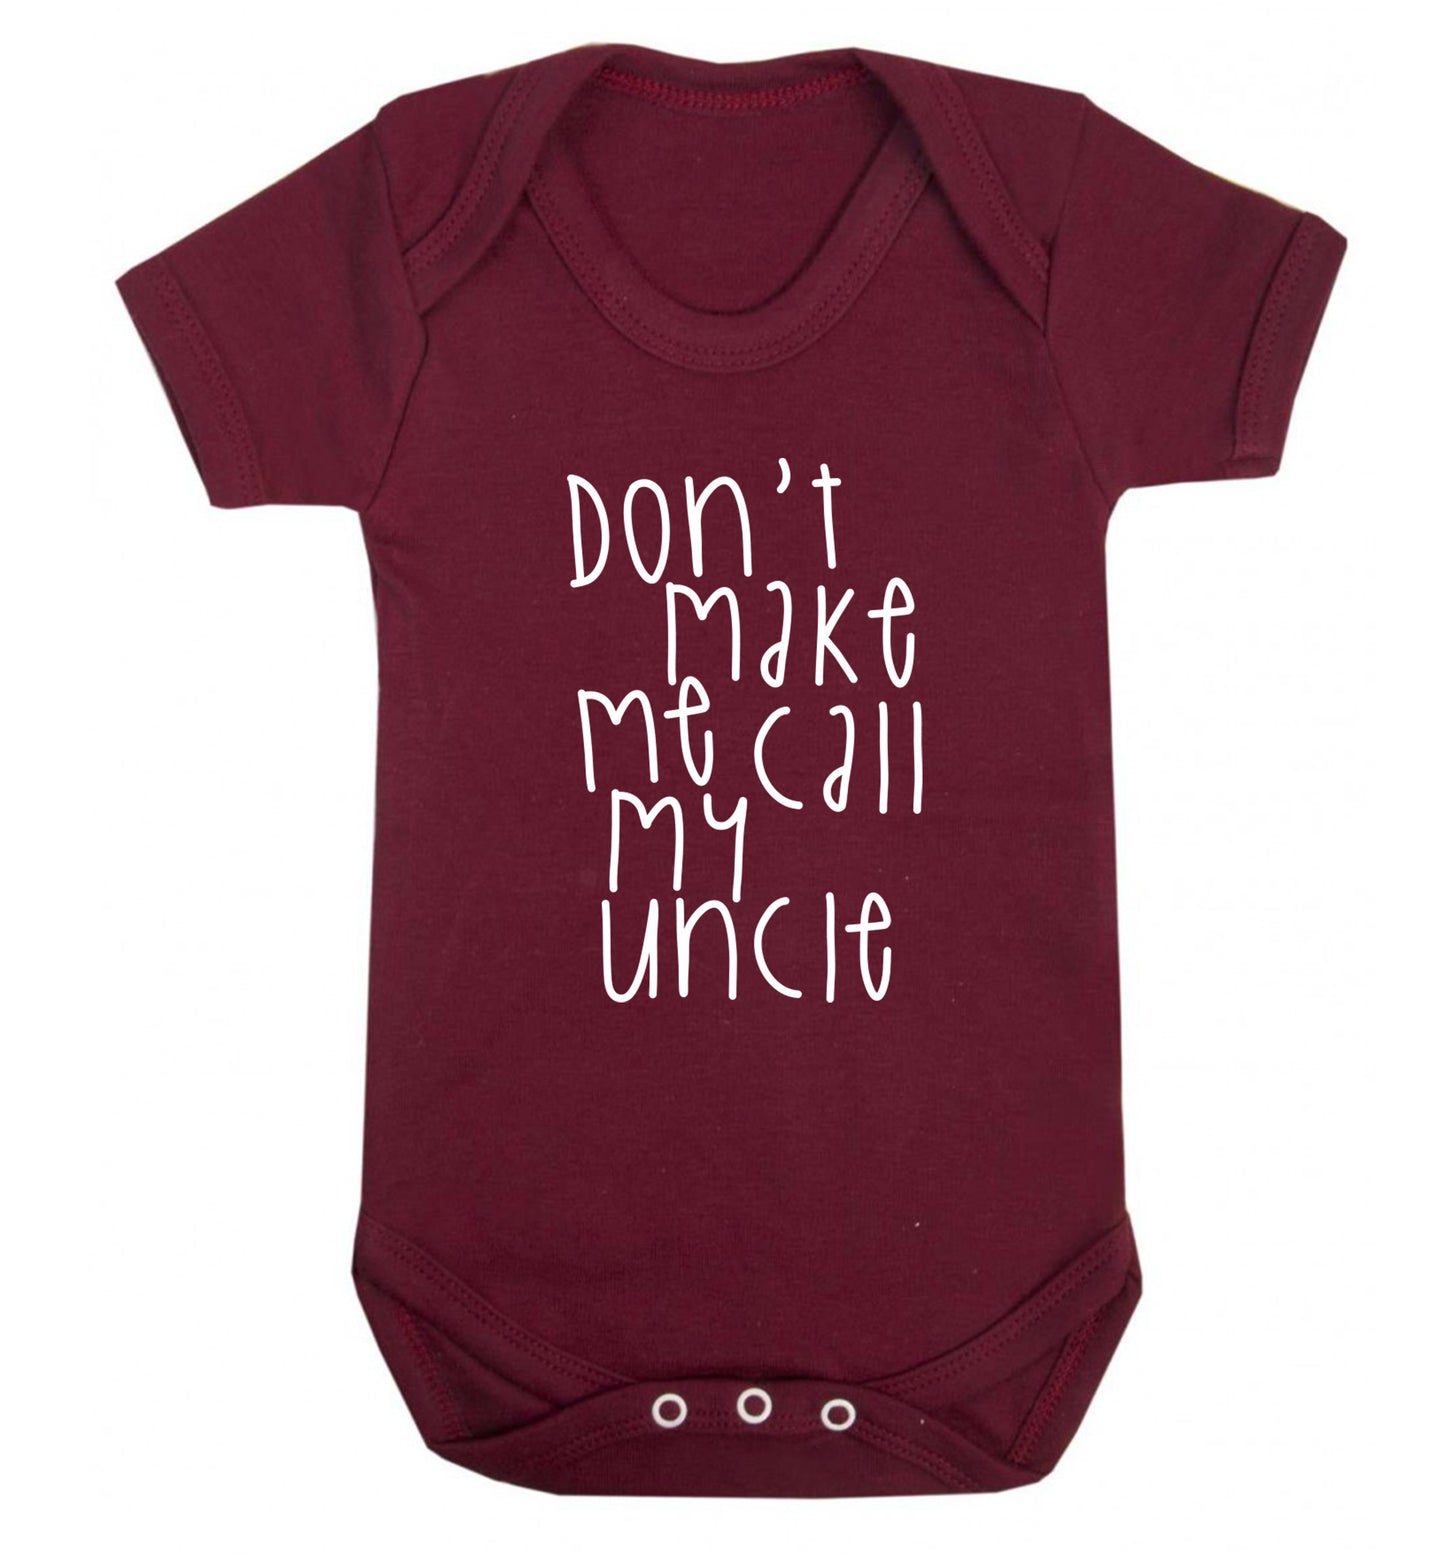 Don't make me call my uncle Baby Vest maroon 18-24 months